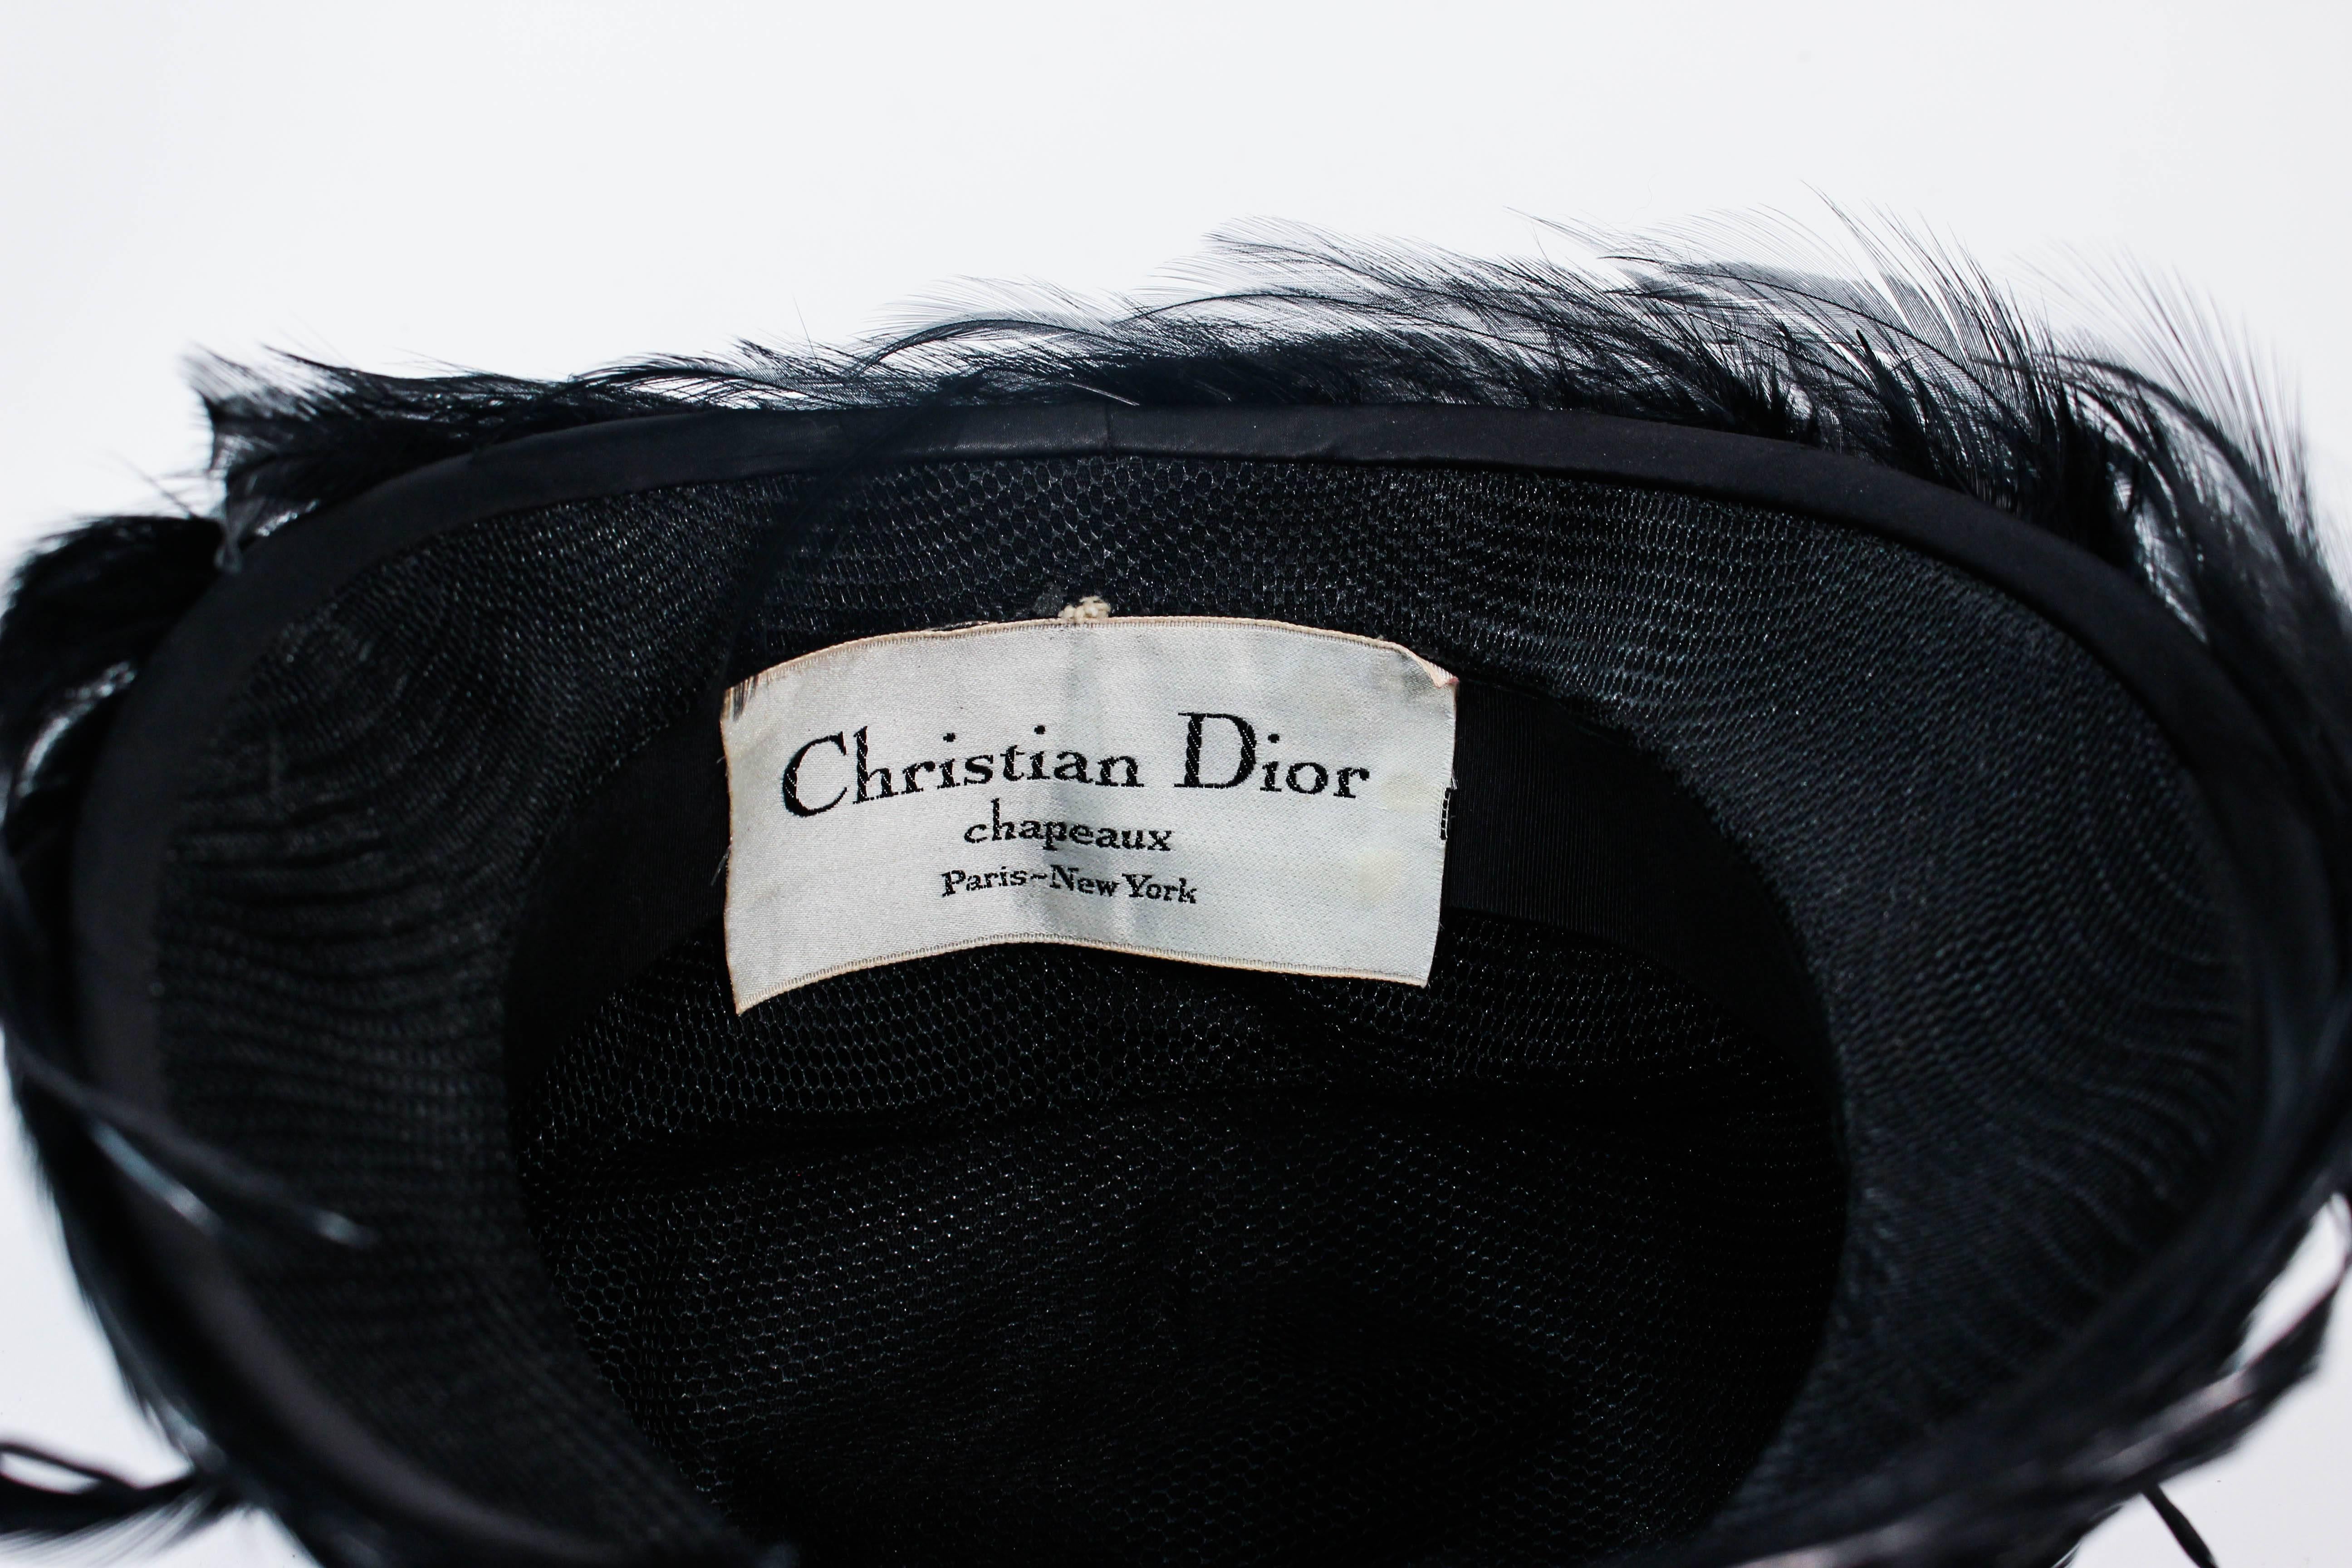 CHRISTIAN DIOR Chapeaux Vintage Black and Cream Feather Cloche Hat 3